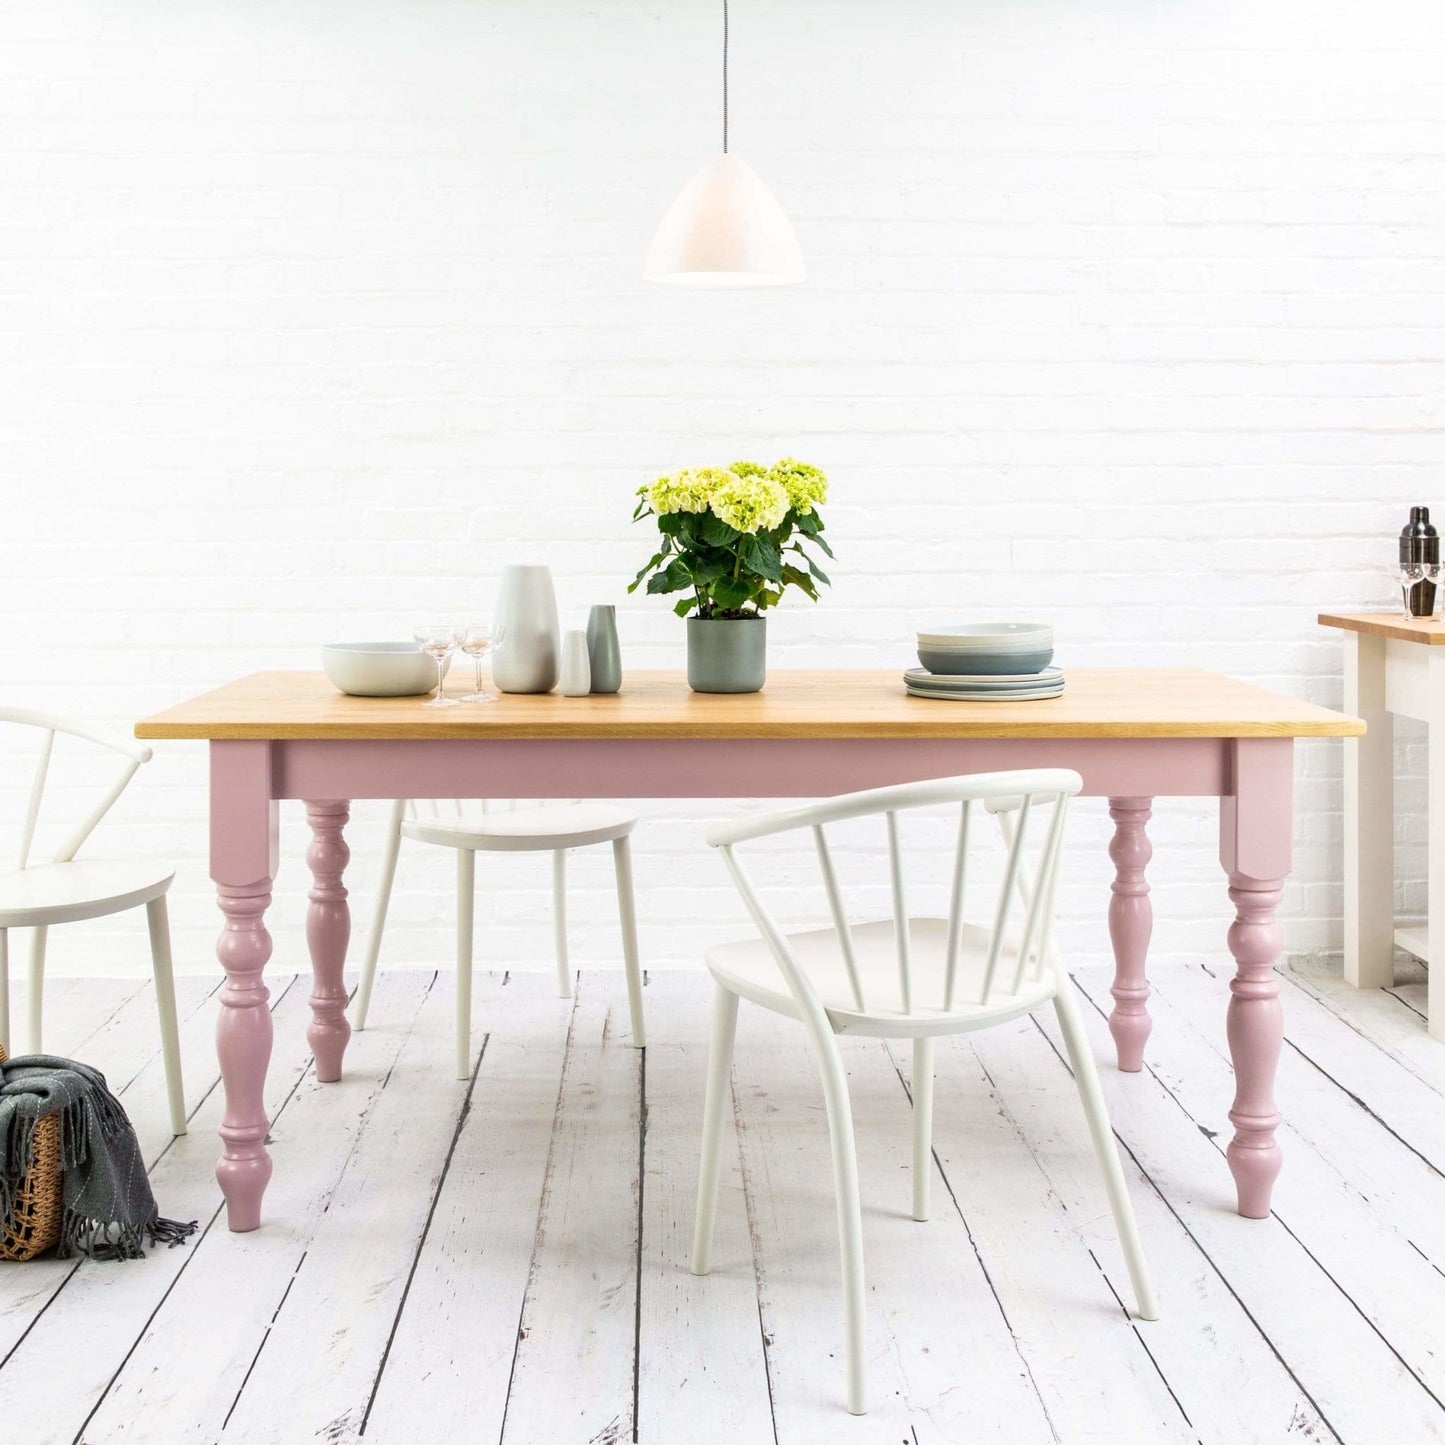 A pink French dining table with prime oak top and chairs in a white kitchen, perfect for home furniture and interior decor.